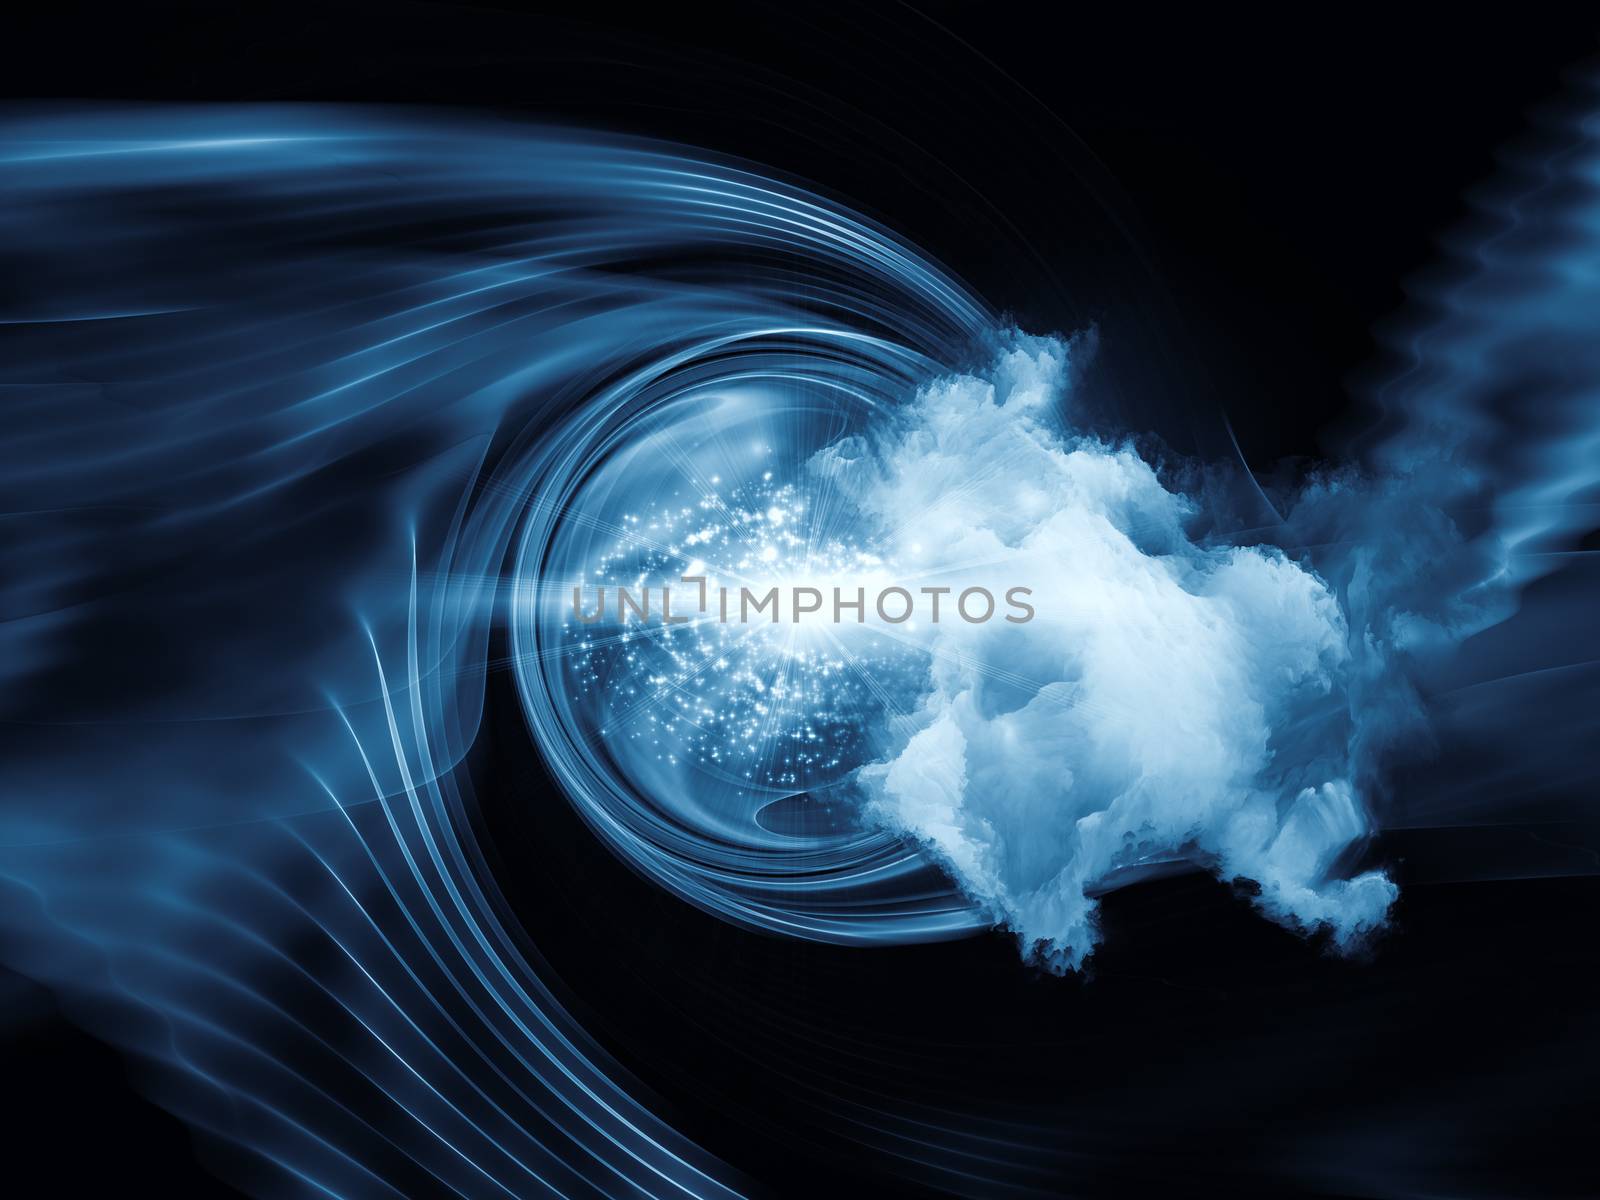 Space Vortex series. Background design of translucent vortex, fractal elements, lights and textures on the subject of science, technology and design